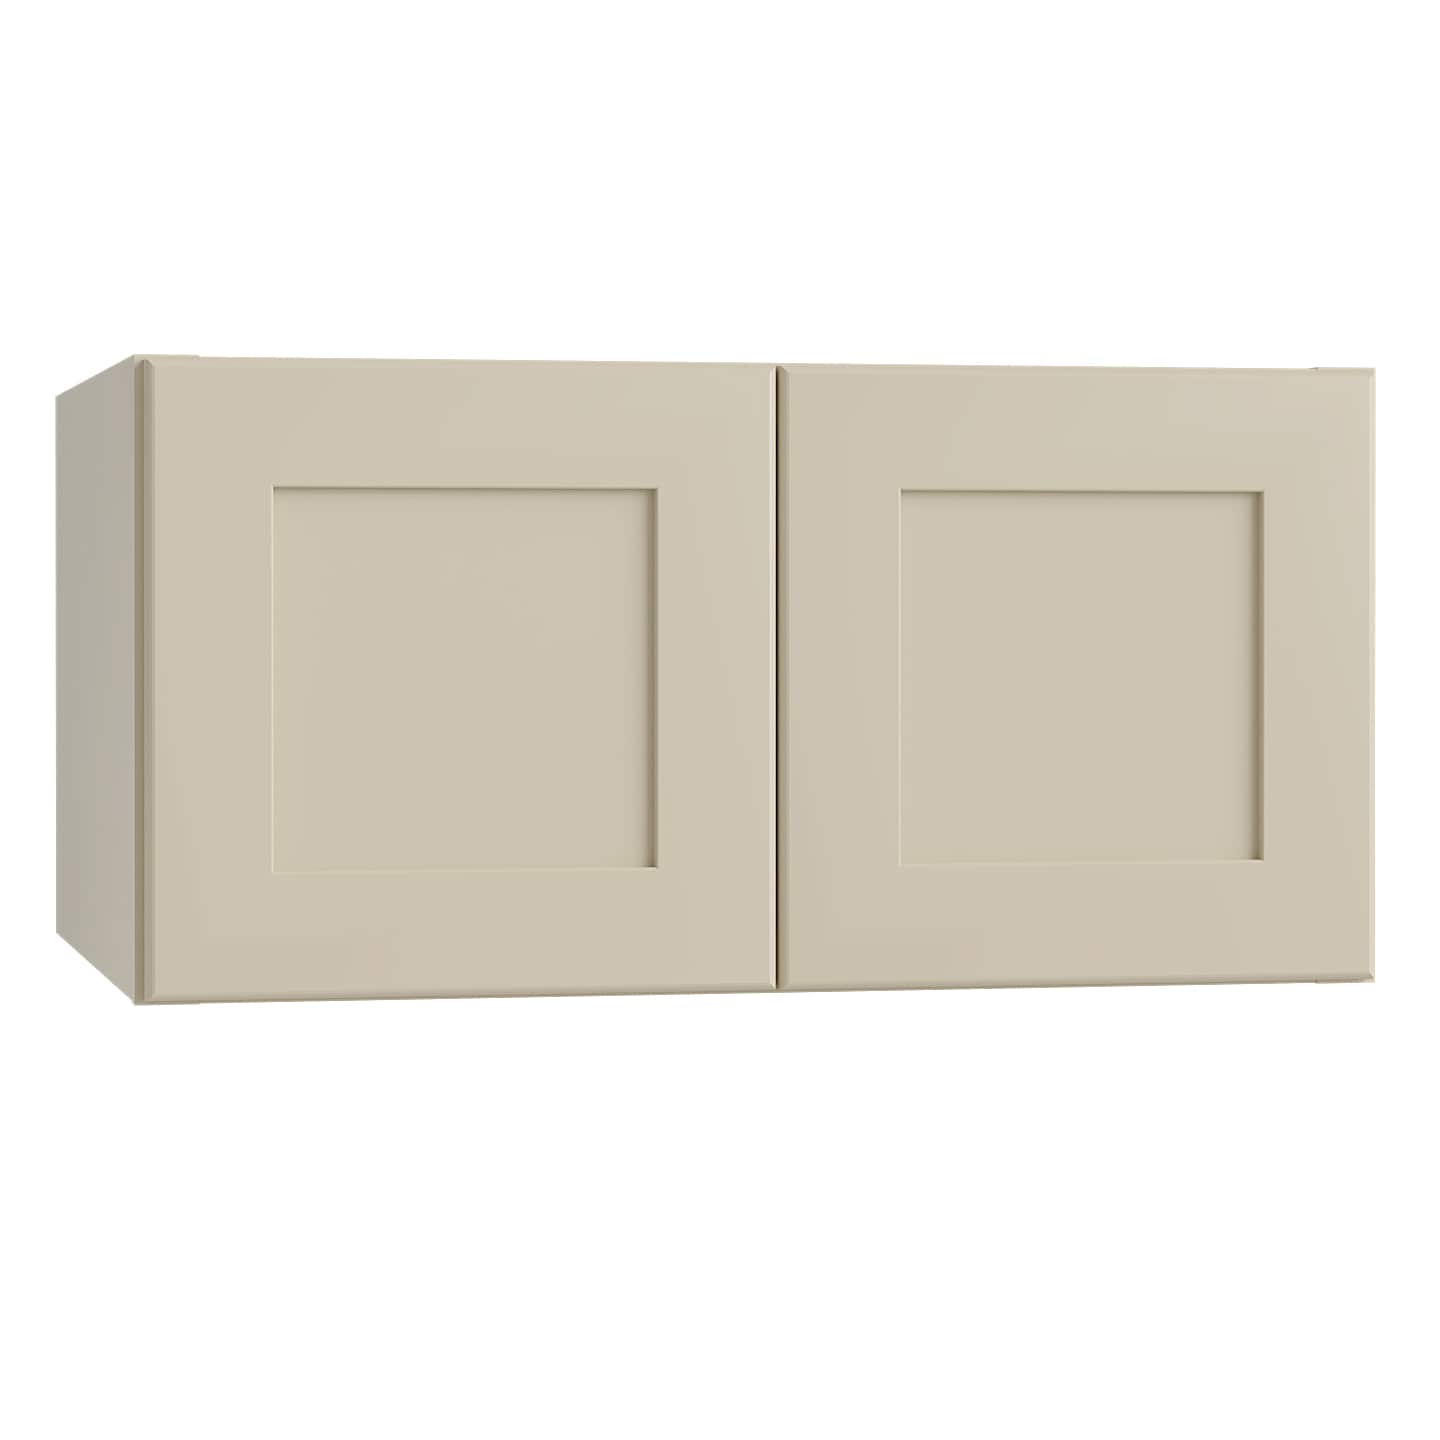 Luxxe Cabinetry 36-in W x 18-in H x 24-in D Norfolk Blended Cream Painted Door Wall Fully Assembled Semi-custom Cabinet in Off-White | W362418-NBC